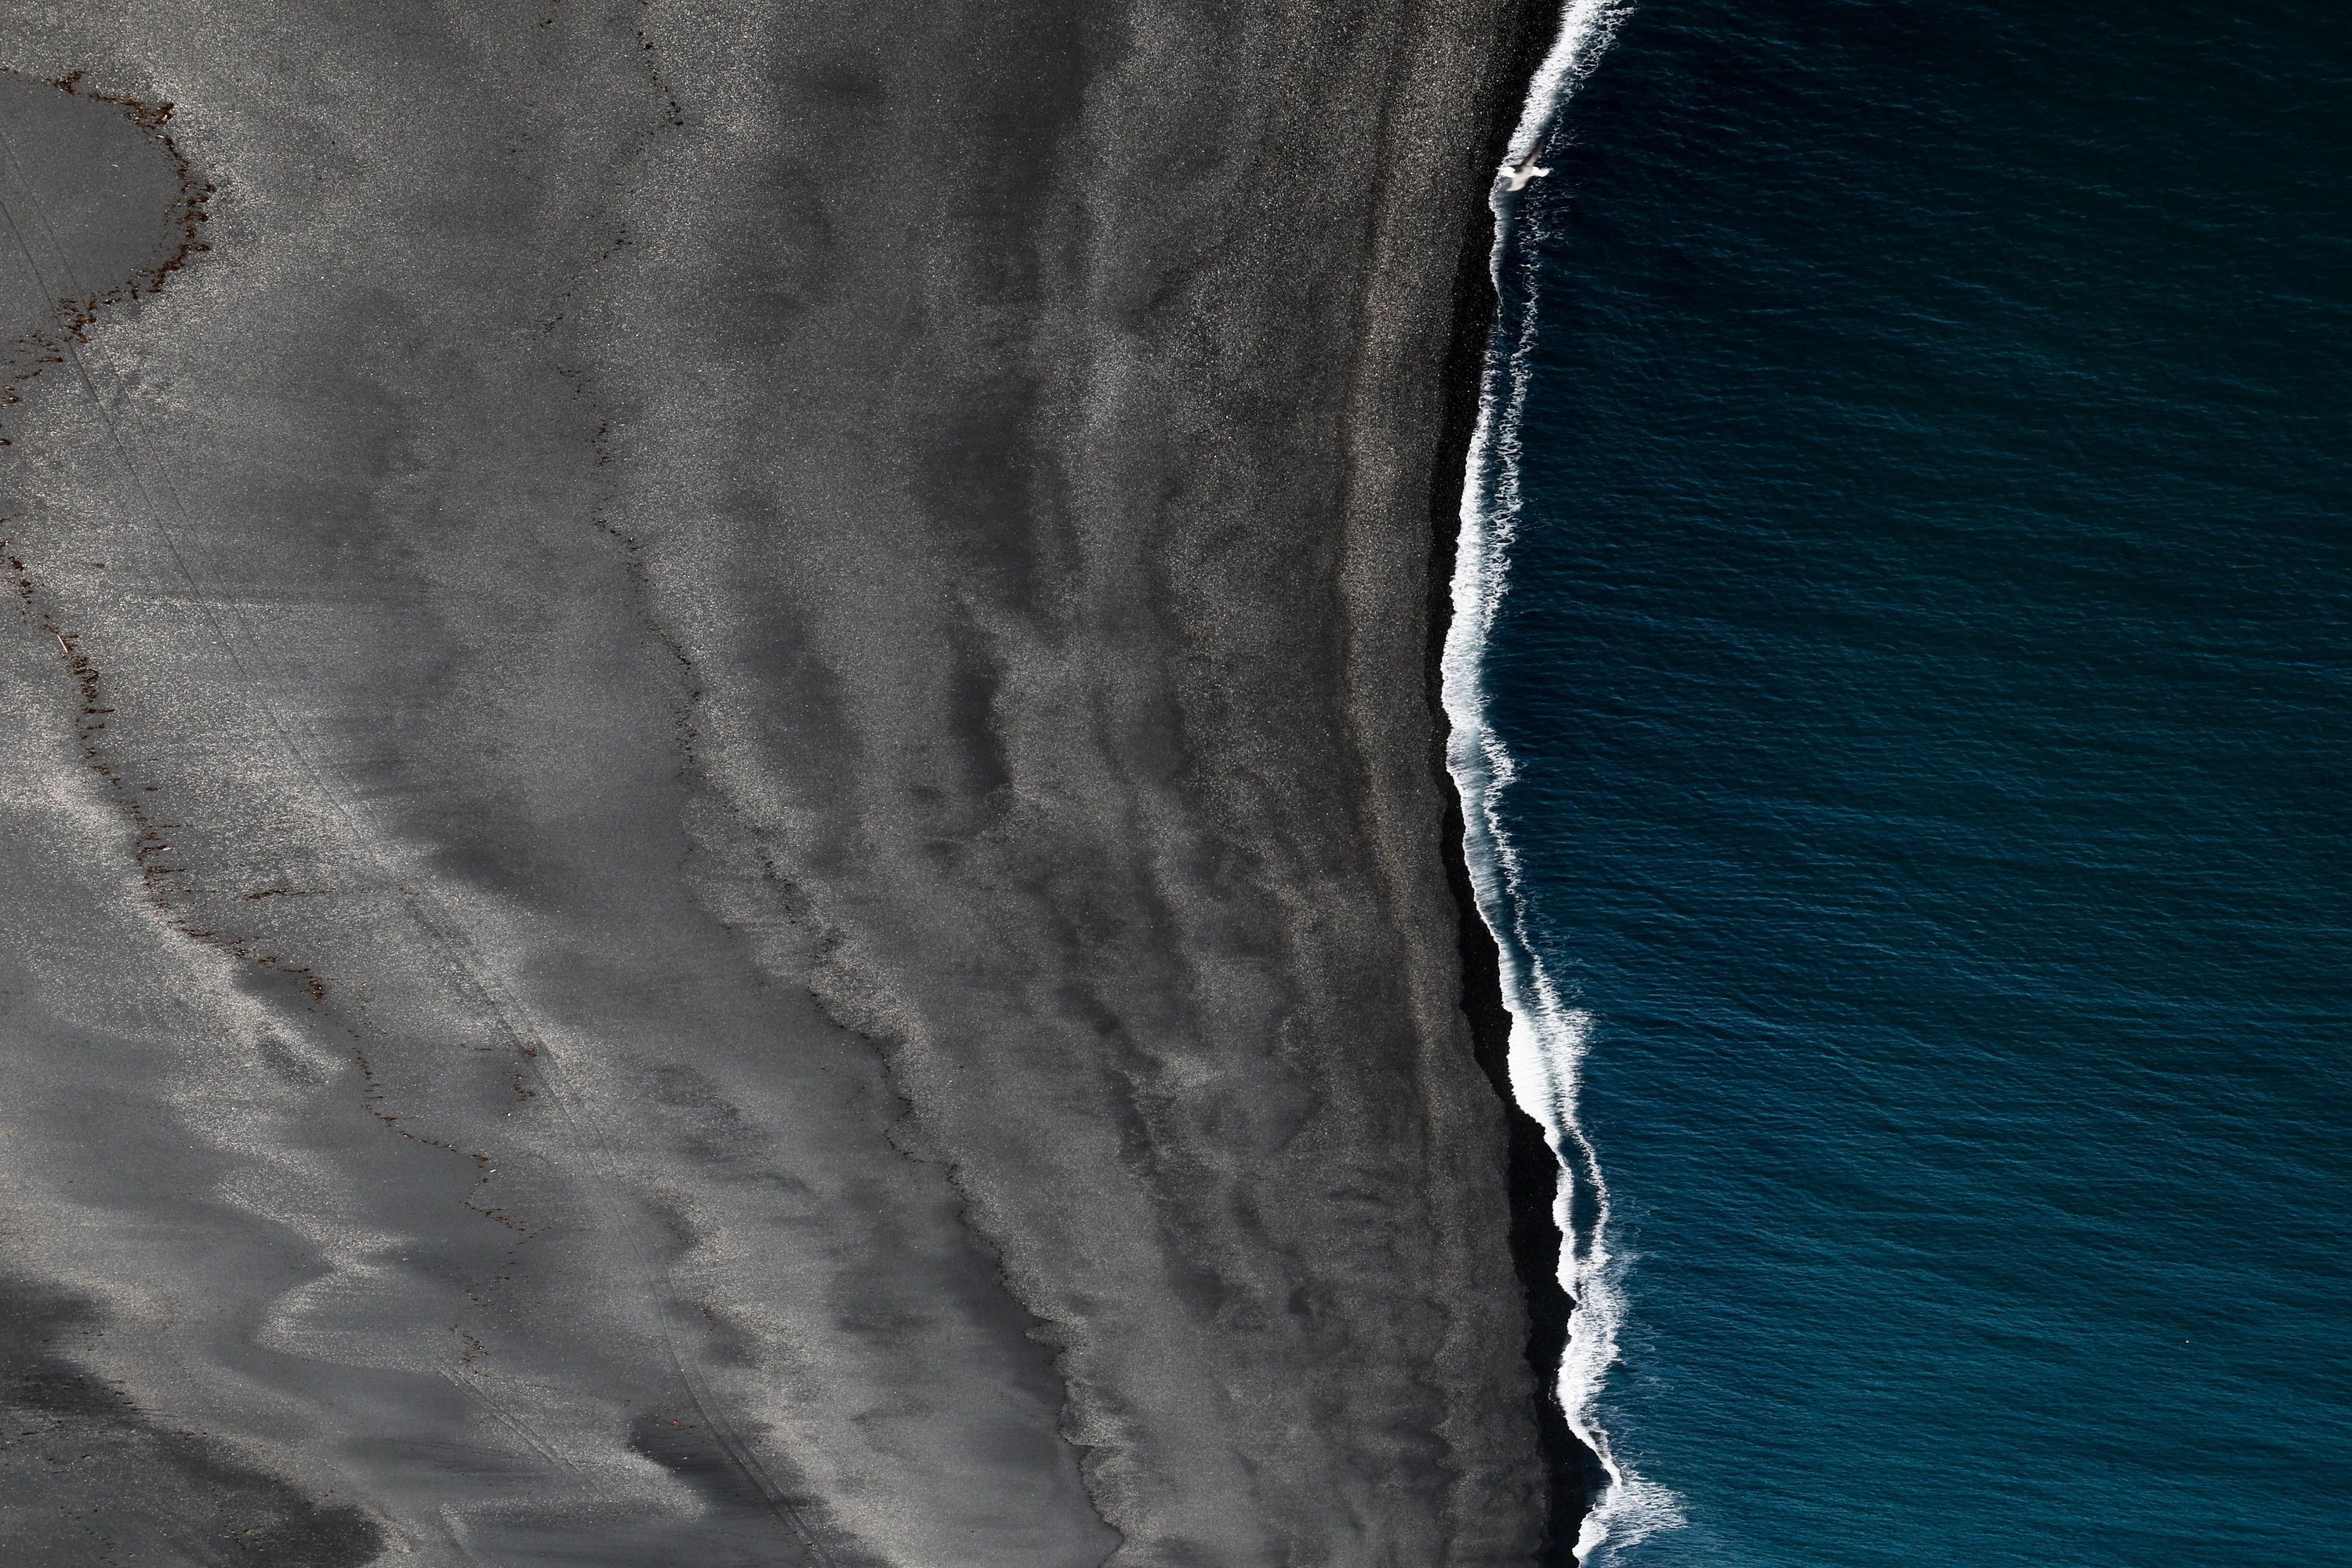 Photo by Jeremy Bishop. Sand picture, Black sand, Image